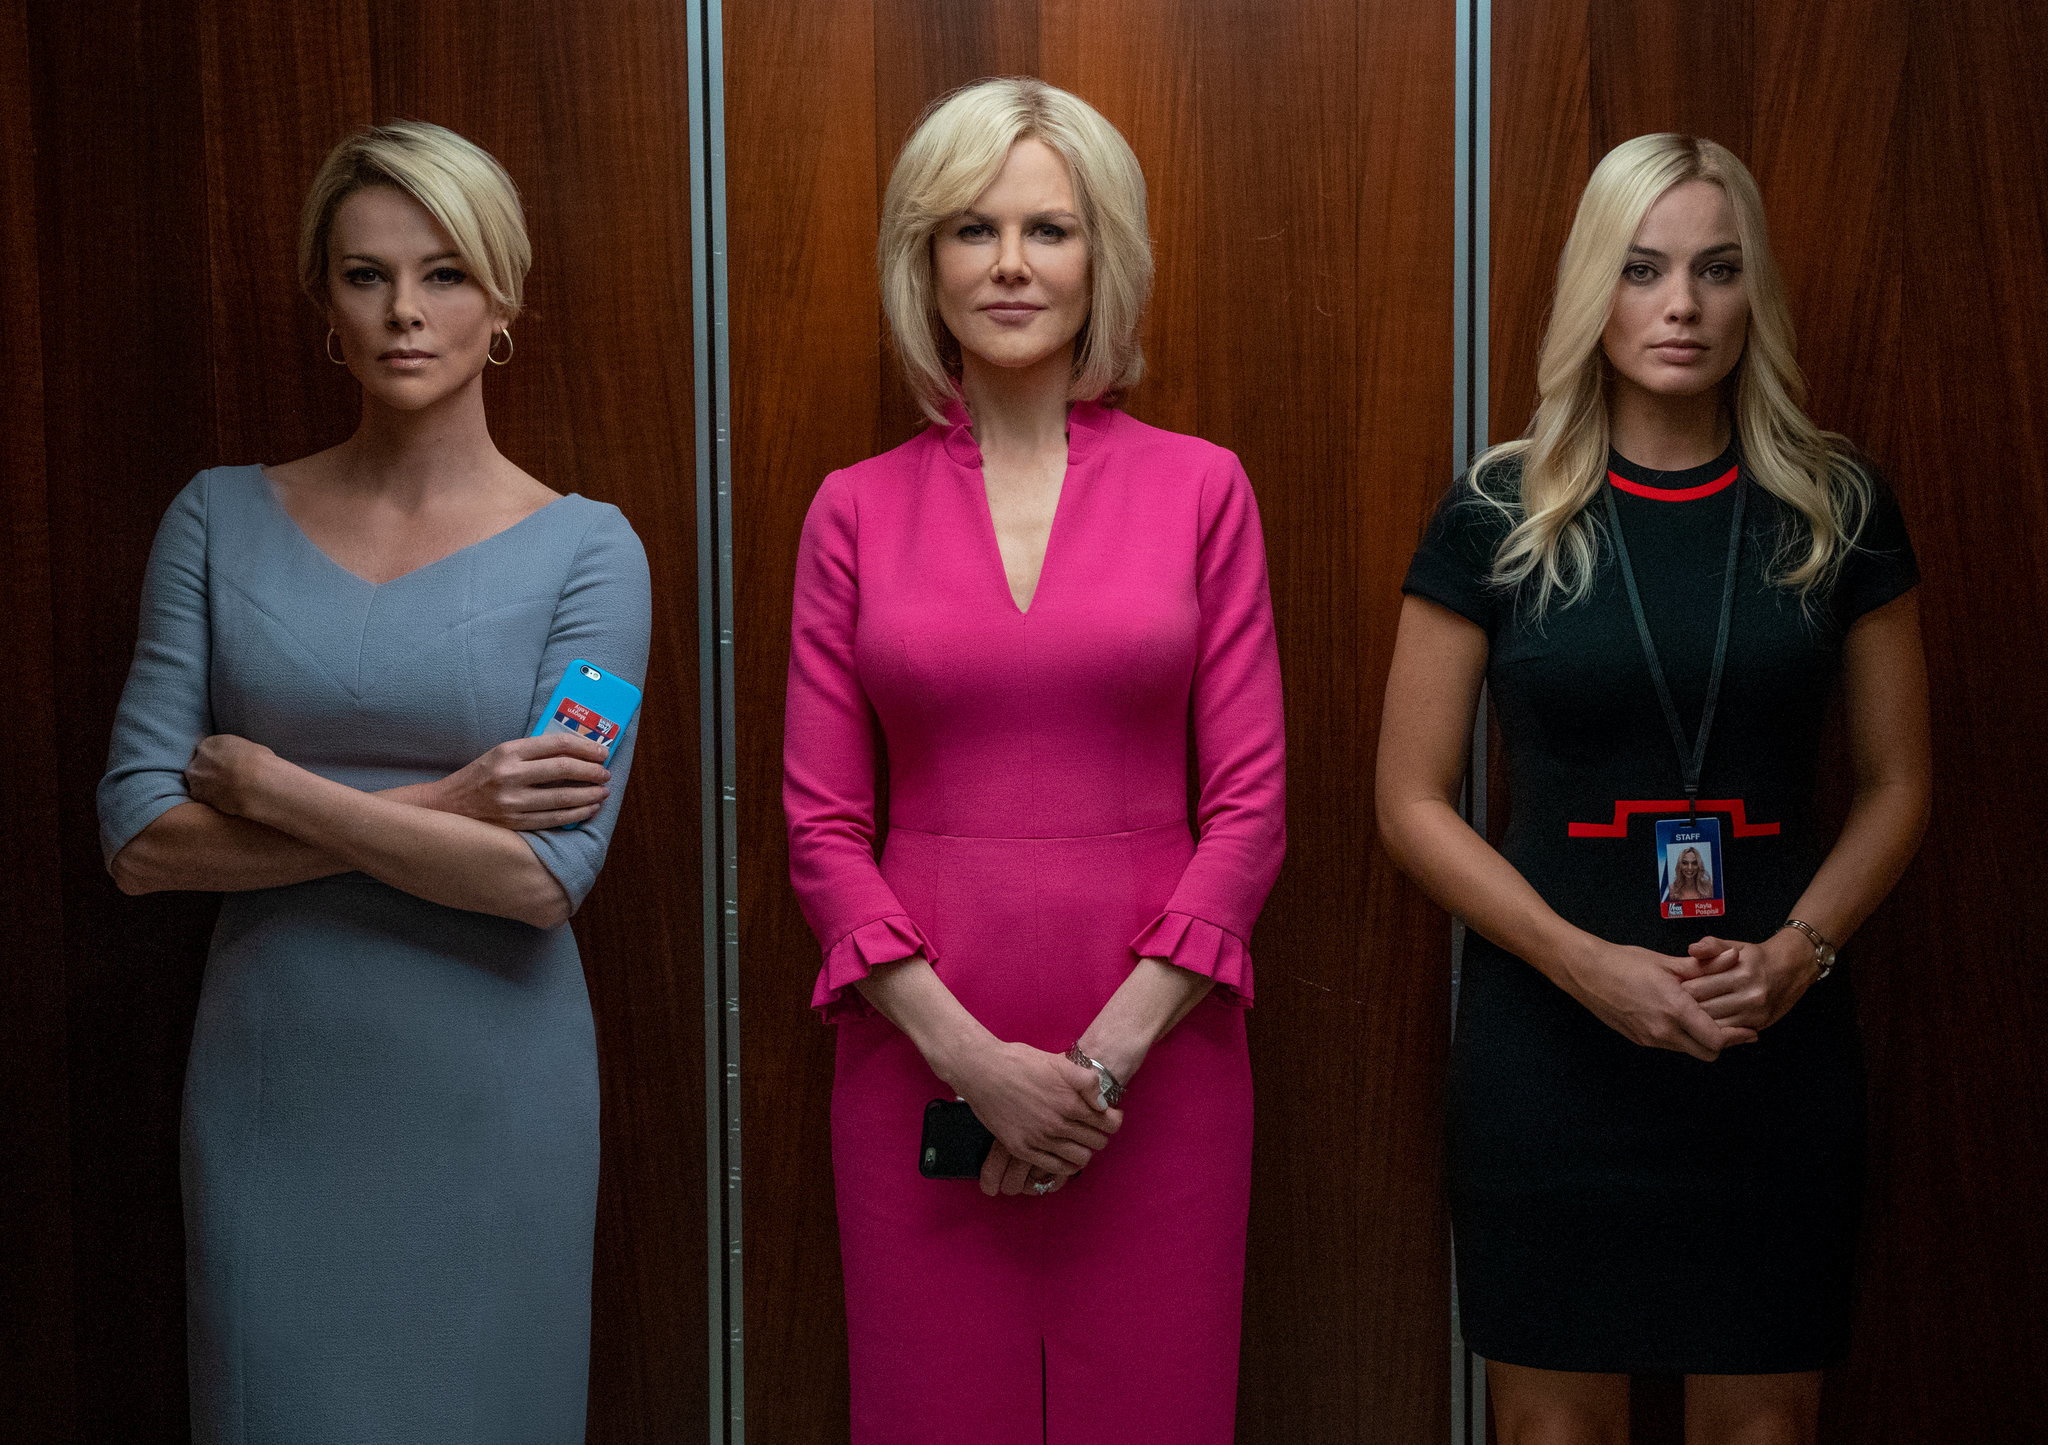 charlize theron, nicole kidman, and margot robbie as megyn, gretchen and kayla, standing in an elevator